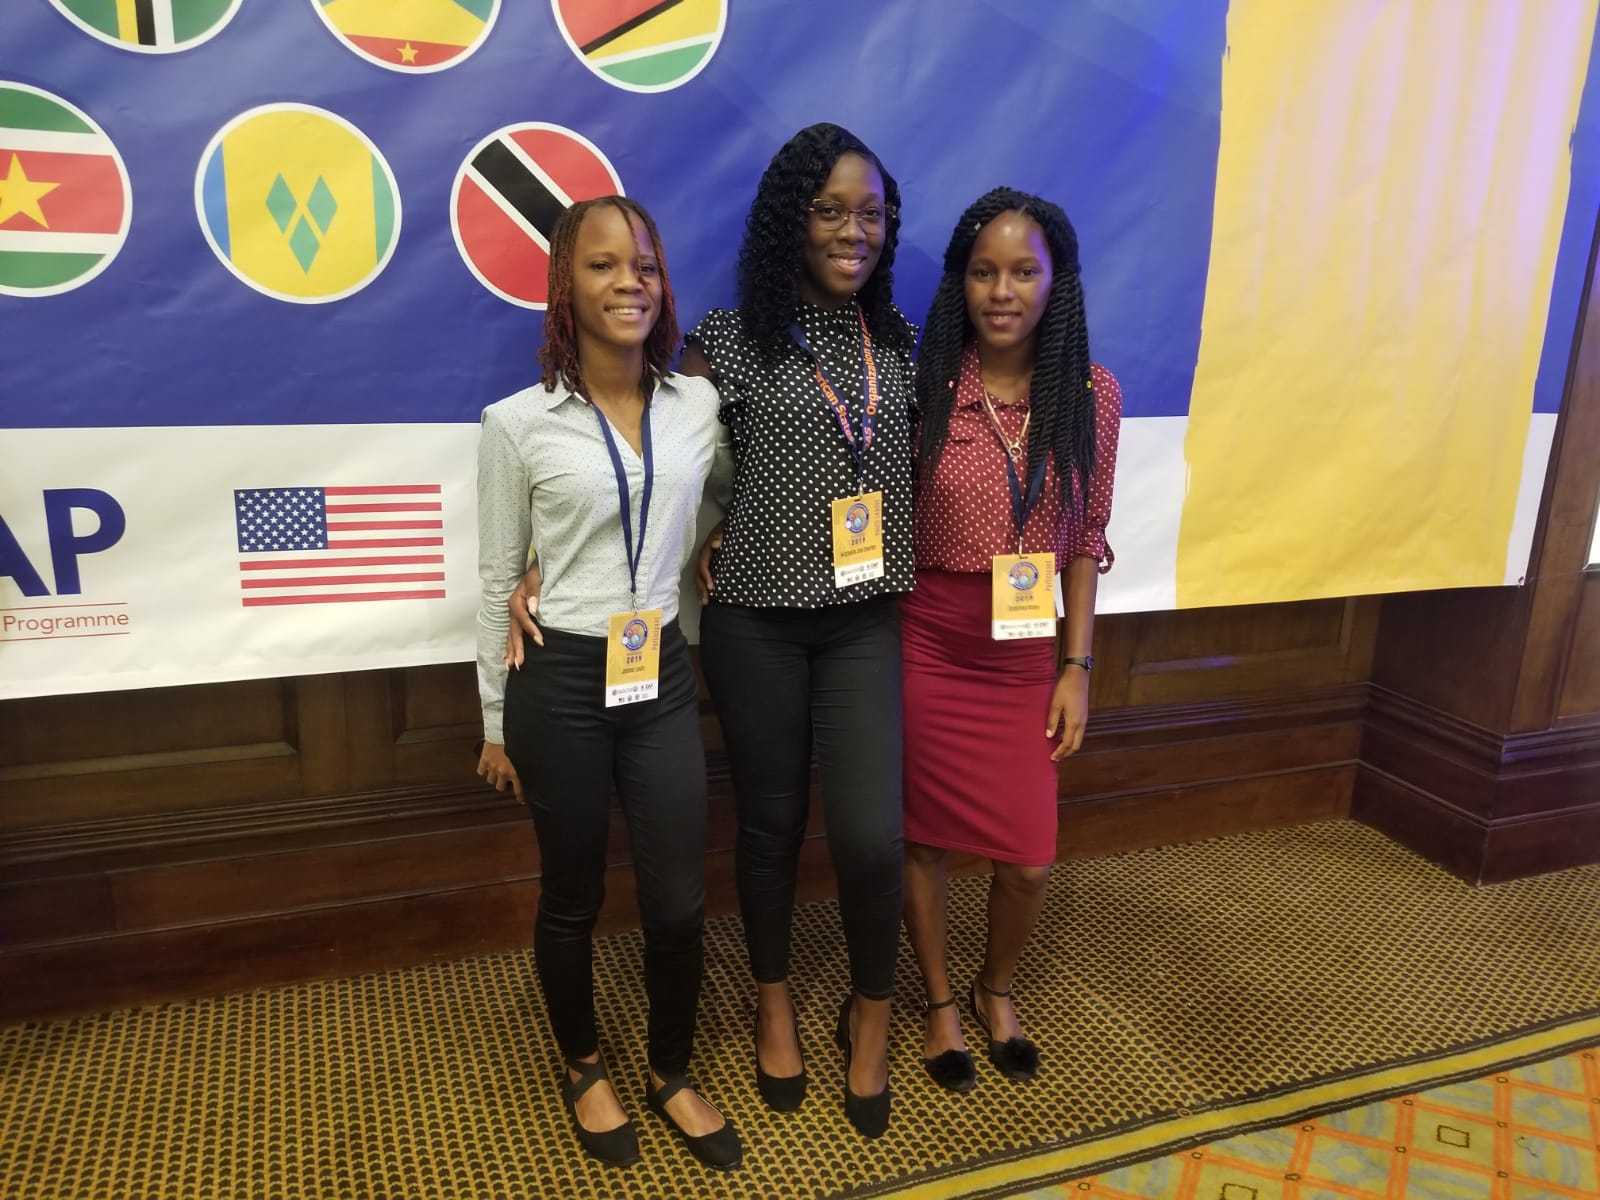  Three Dominicans left for Barbados to attend the Caribbean Youth Forum on Drug Use Prevention